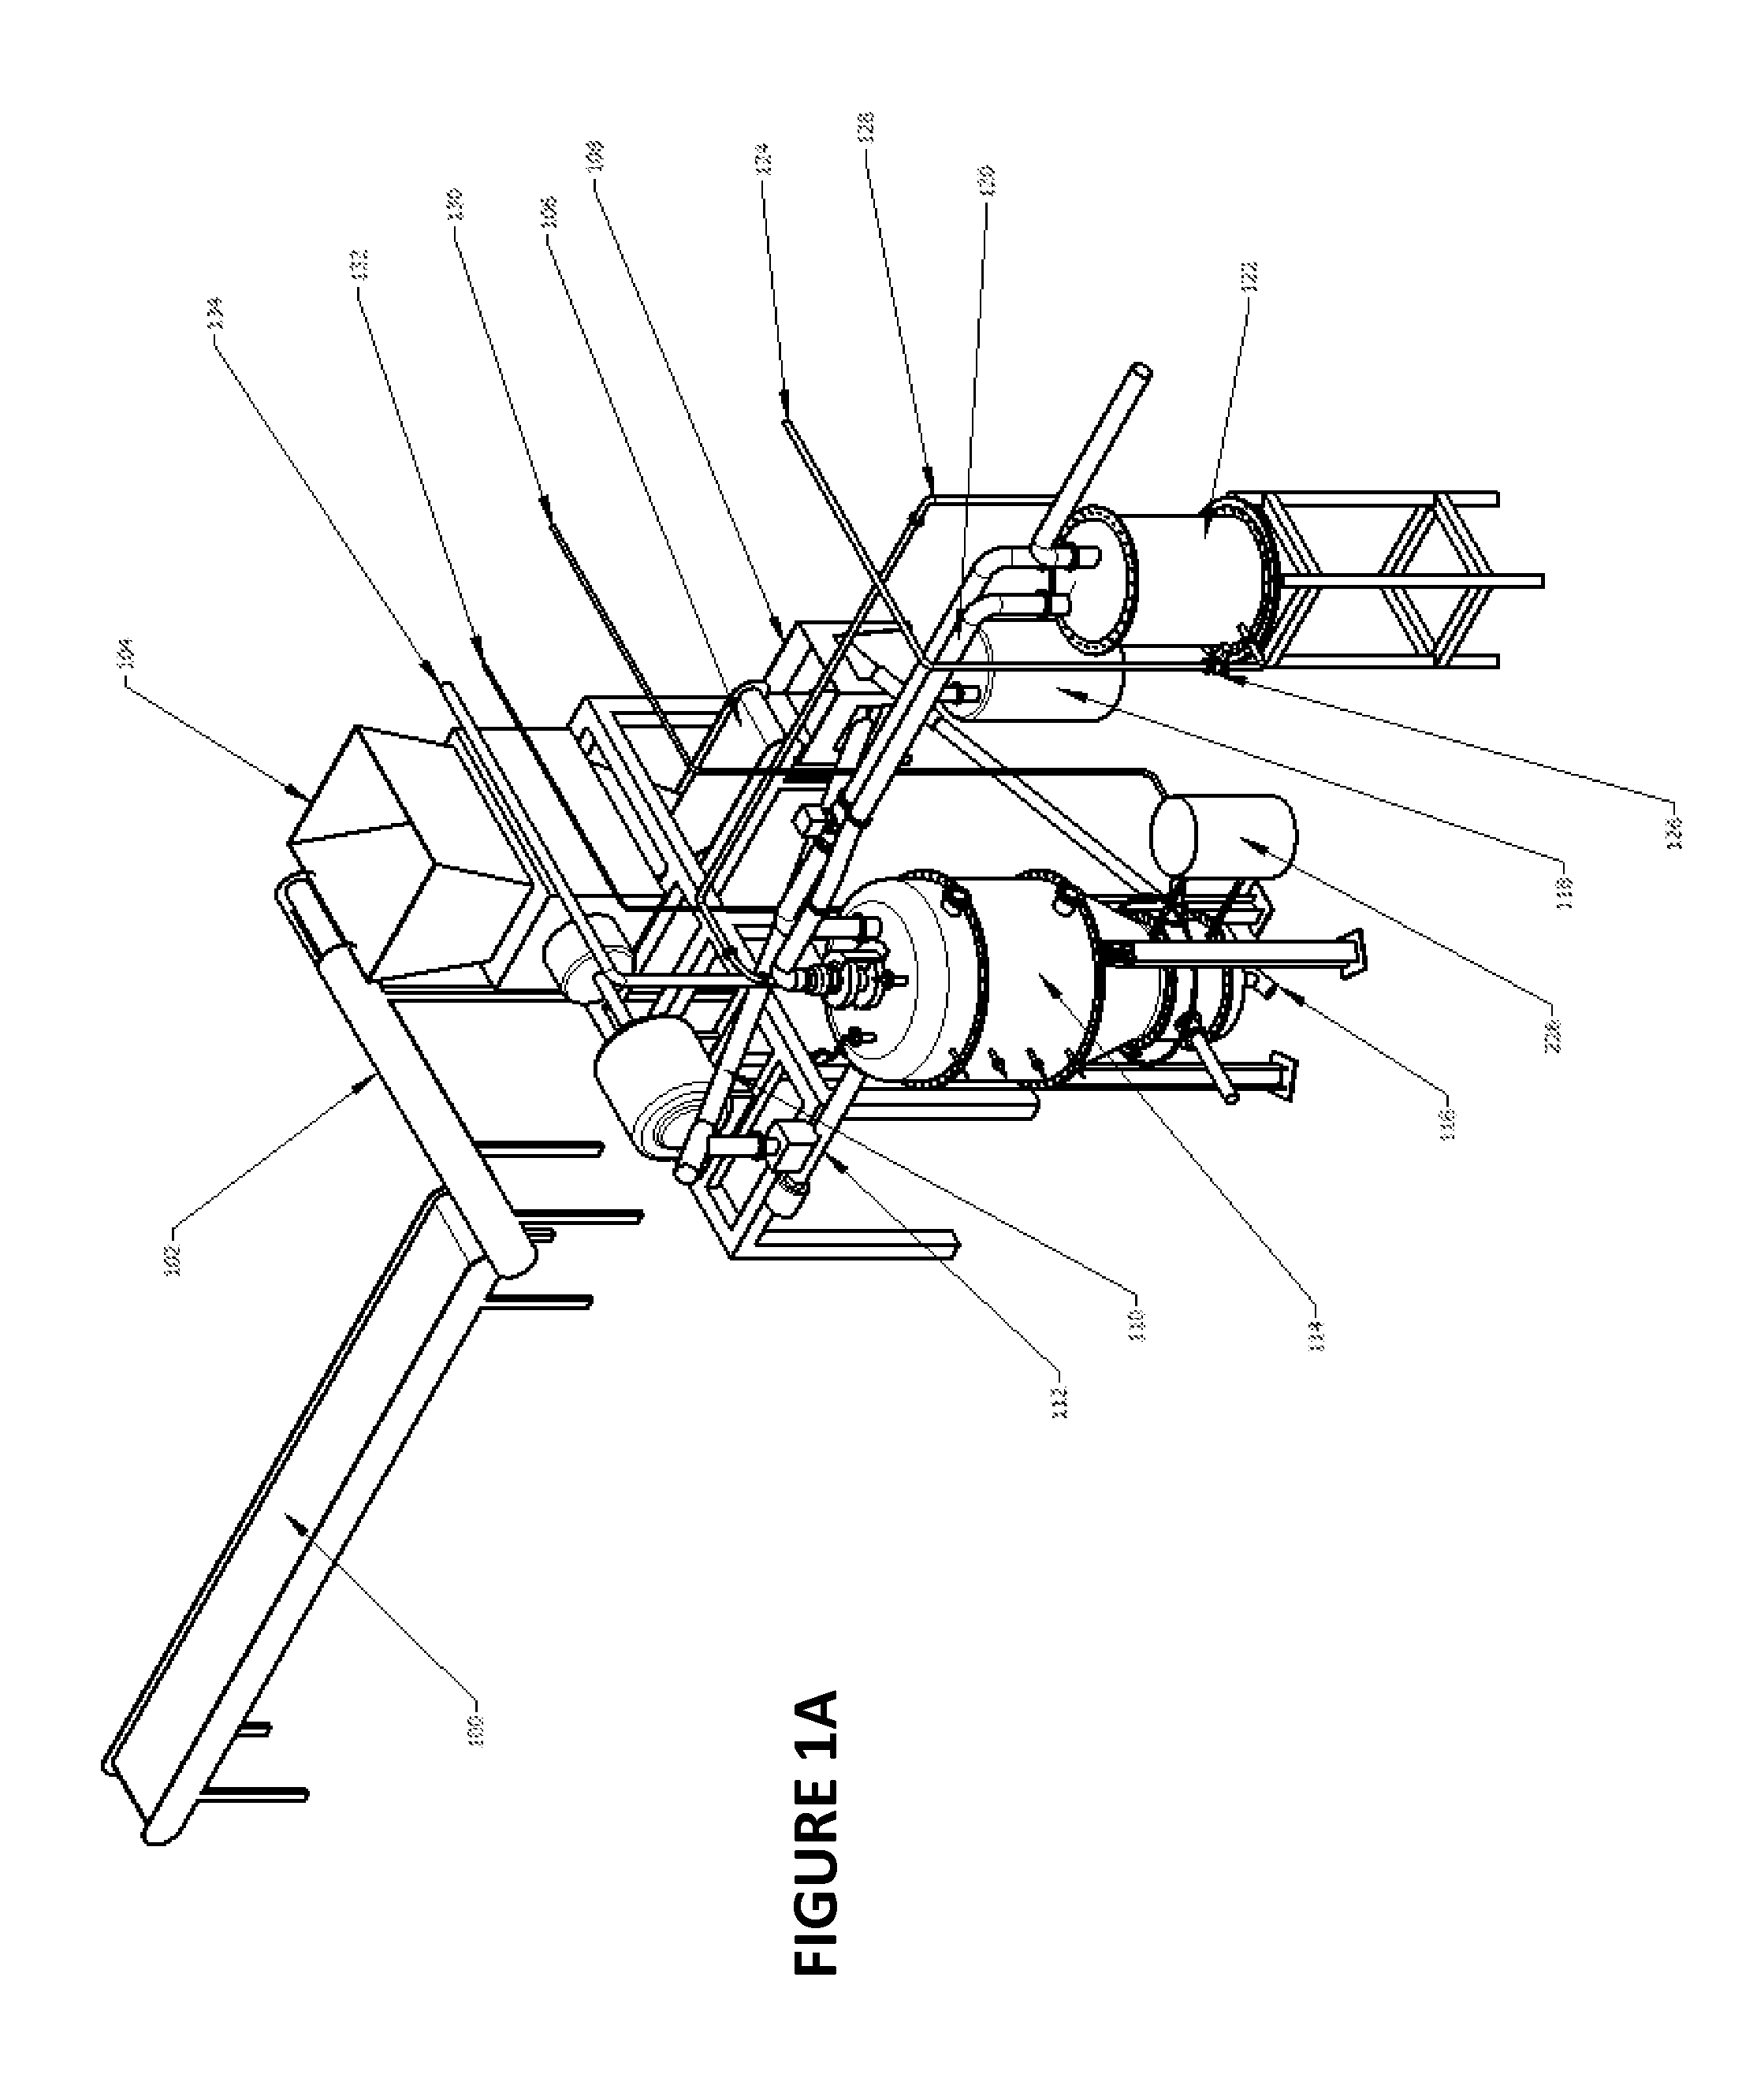 System and method for processing material to generate syngas using plurality of gas removal locations